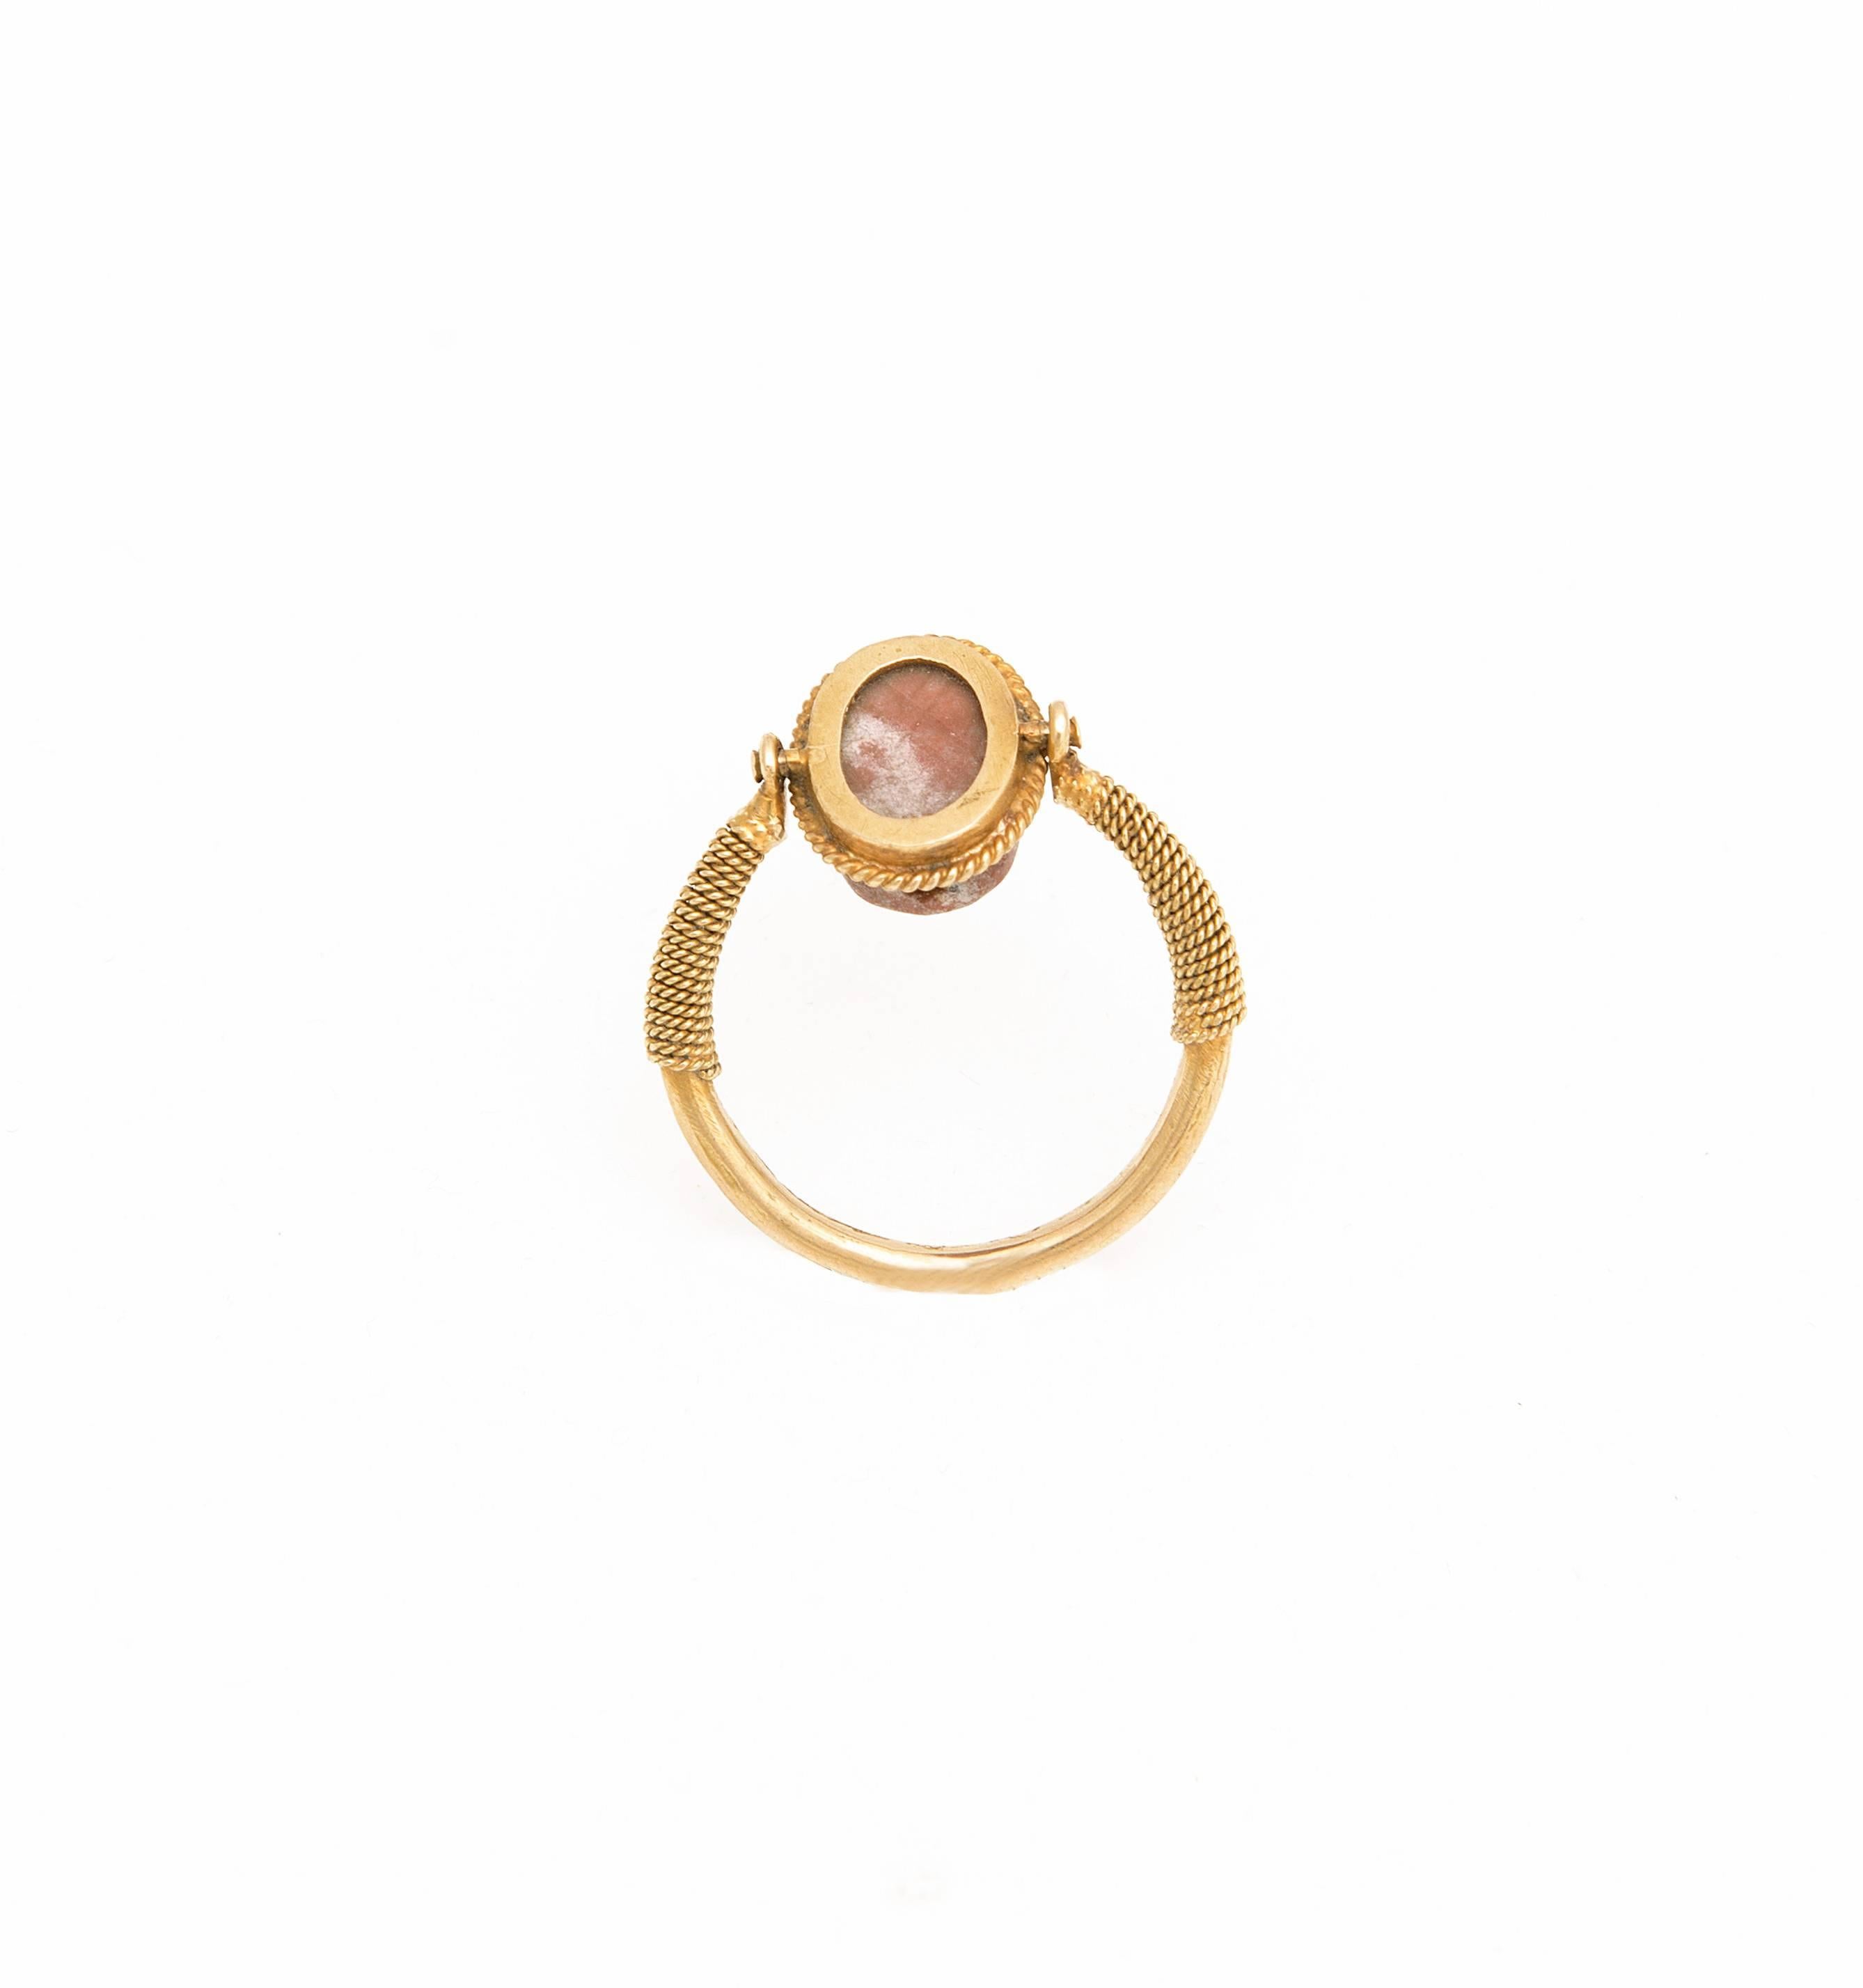 This delicate finger ring is wearable and remains in an excellent state of preservation.
The fine gold ring has an ancient swivelling scarab, drilled lengthwise from two sides.
Provenance: Private English collection.
Accompanied by a certificate of